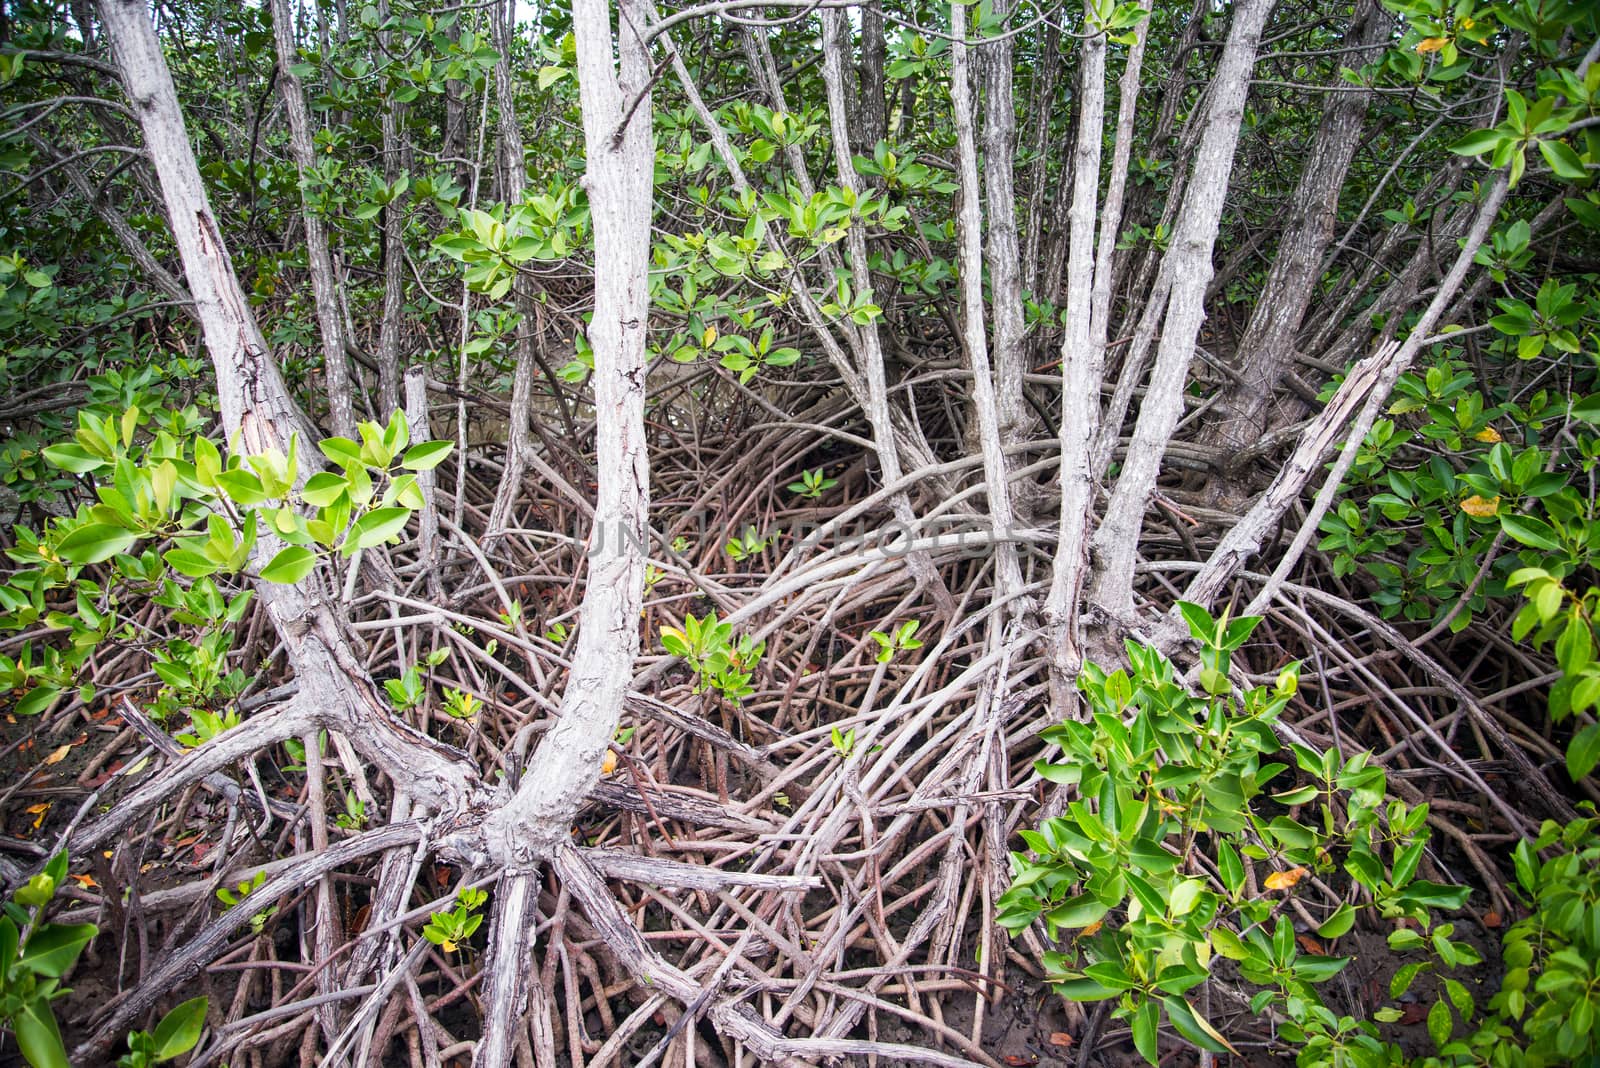 Mangrove forest on the coast of Thailand